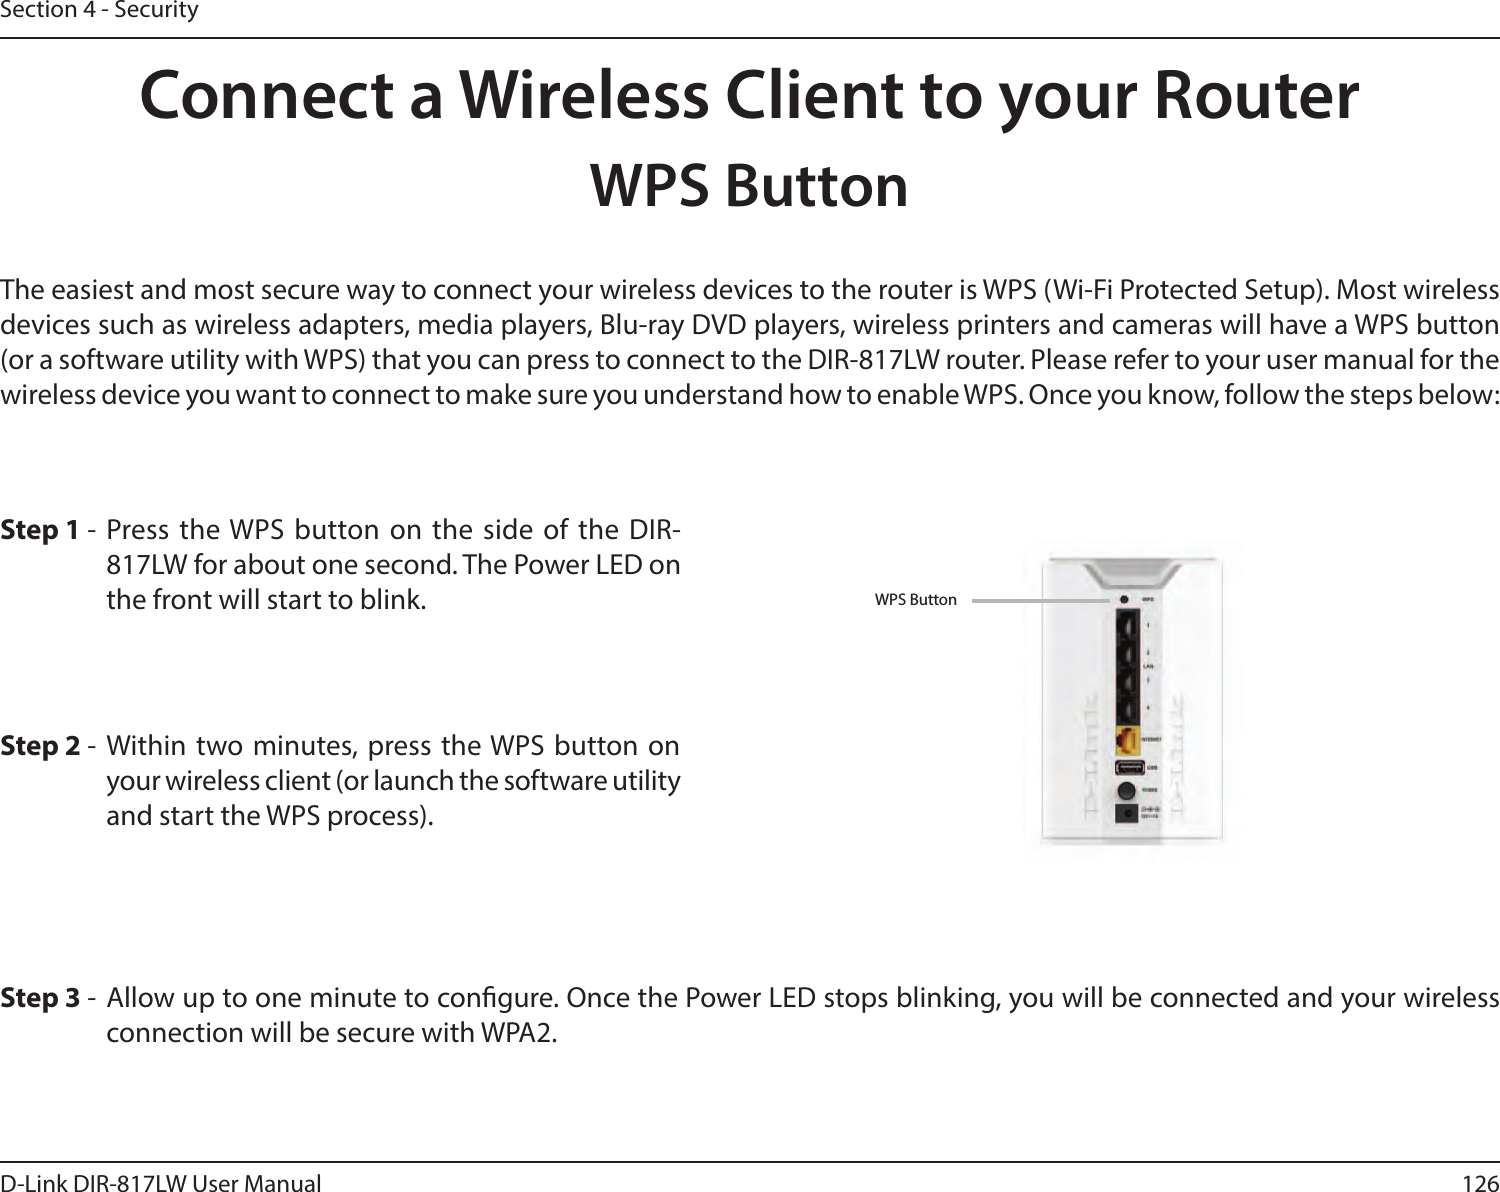 126D-Link DIR-817LW User ManualSection 4 - SecurityConnect a Wireless Client to your RouterWPS ButtonStep 2 - Within two minutes, press the WPS button on your wireless client (or launch the software utility and start the WPS process).The easiest and most secure way to connect your wireless devices to the router is WPS (Wi-Fi Protected Setup). Most wireless devices such as wireless adapters, media players, Blu-ray DVD players, wireless printers and cameras will have a WPS button (or a software utility with WPS) that you can press to connect to the DIR-817LW router. Please refer to your user manual for the wireless device you want to connect to make sure you understand how to enable WPS. Once you know, follow the steps below:Step 1 -  Press  the WPS  button on  the  side  of  the  DIR-817LW for about one second. The Power LED on the front will start to blink.Step 3 -  Allow up to one minute to congure. Once the Power LED stops blinking, you will be connected and your wireless connection will be secure with WPA2.WPS Button